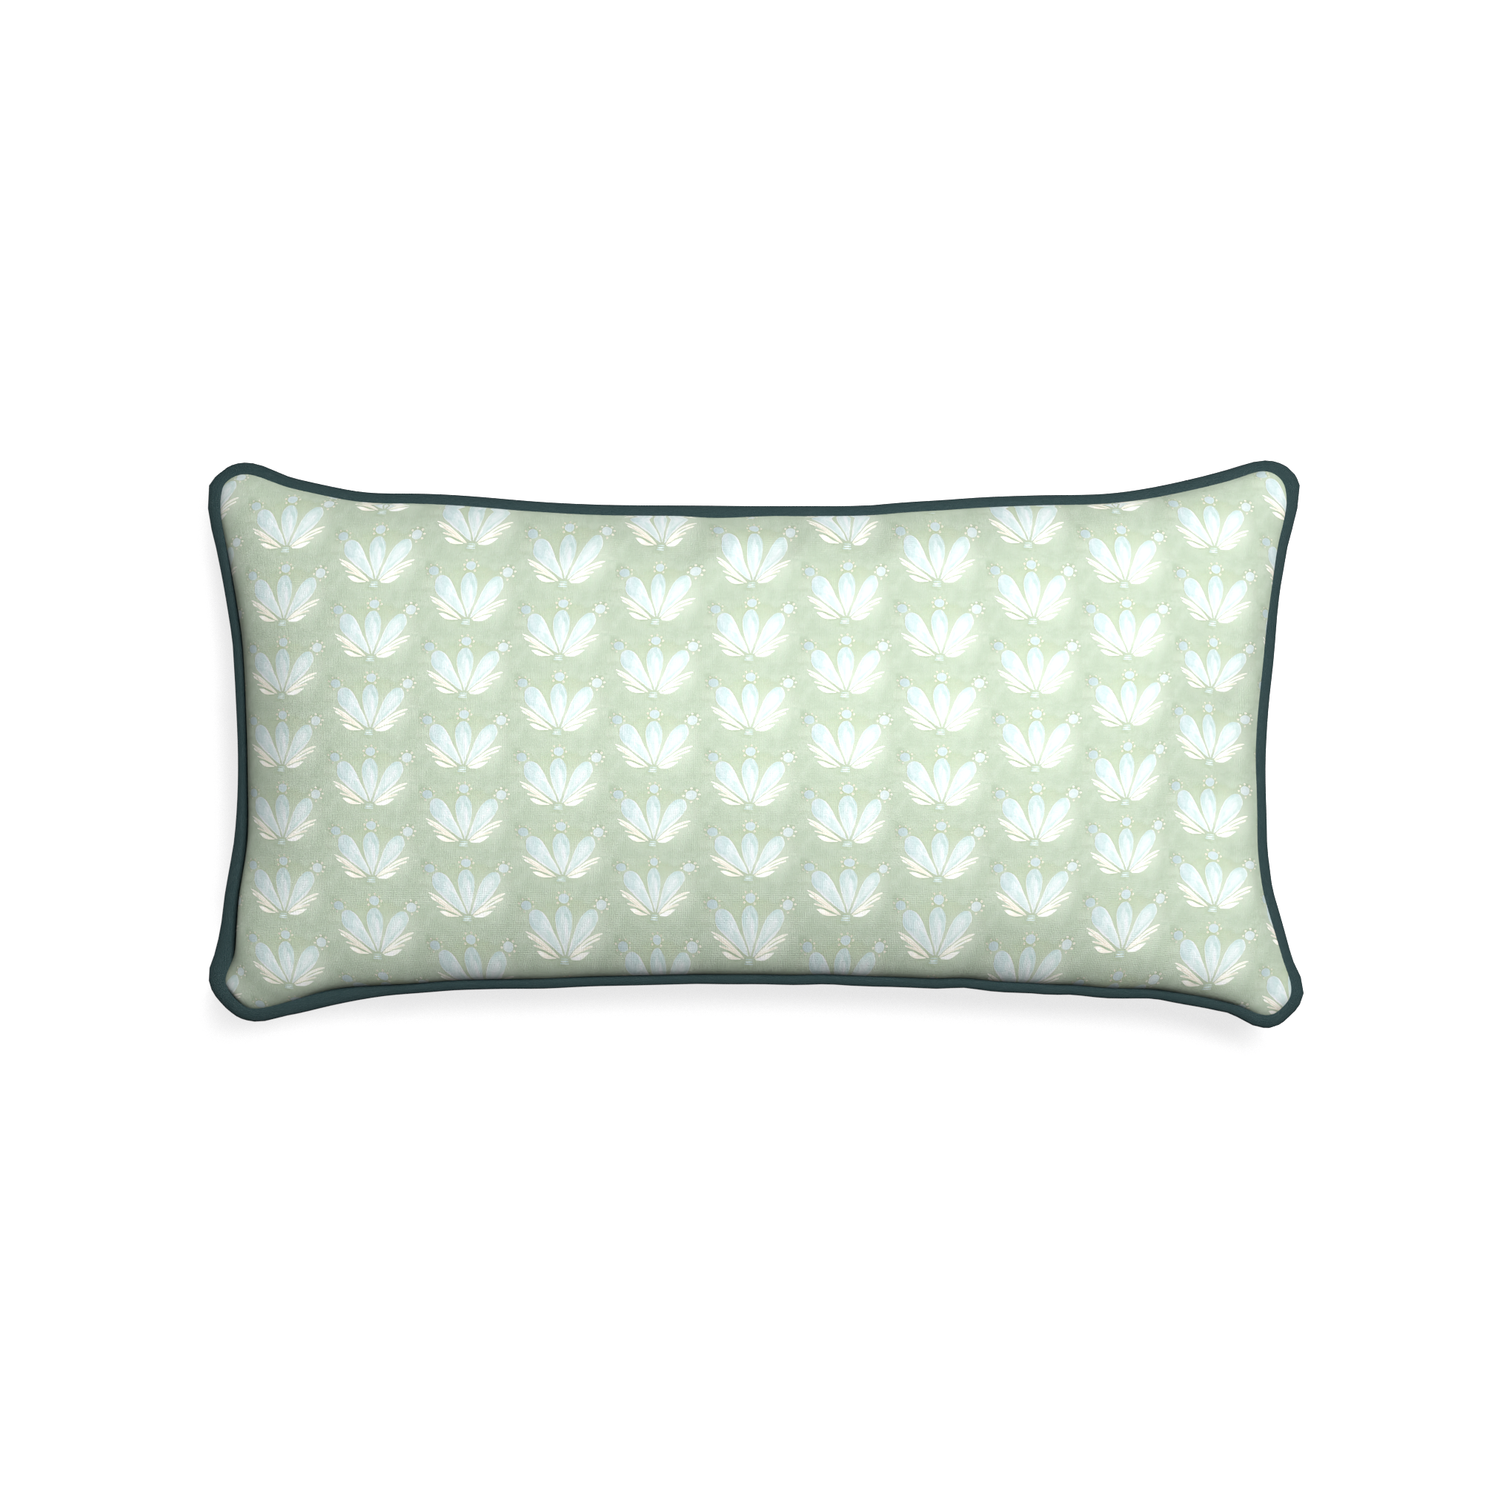 Midi-lumbar serena sea salt custom blue & green floral drop repeatpillow with p piping on white background